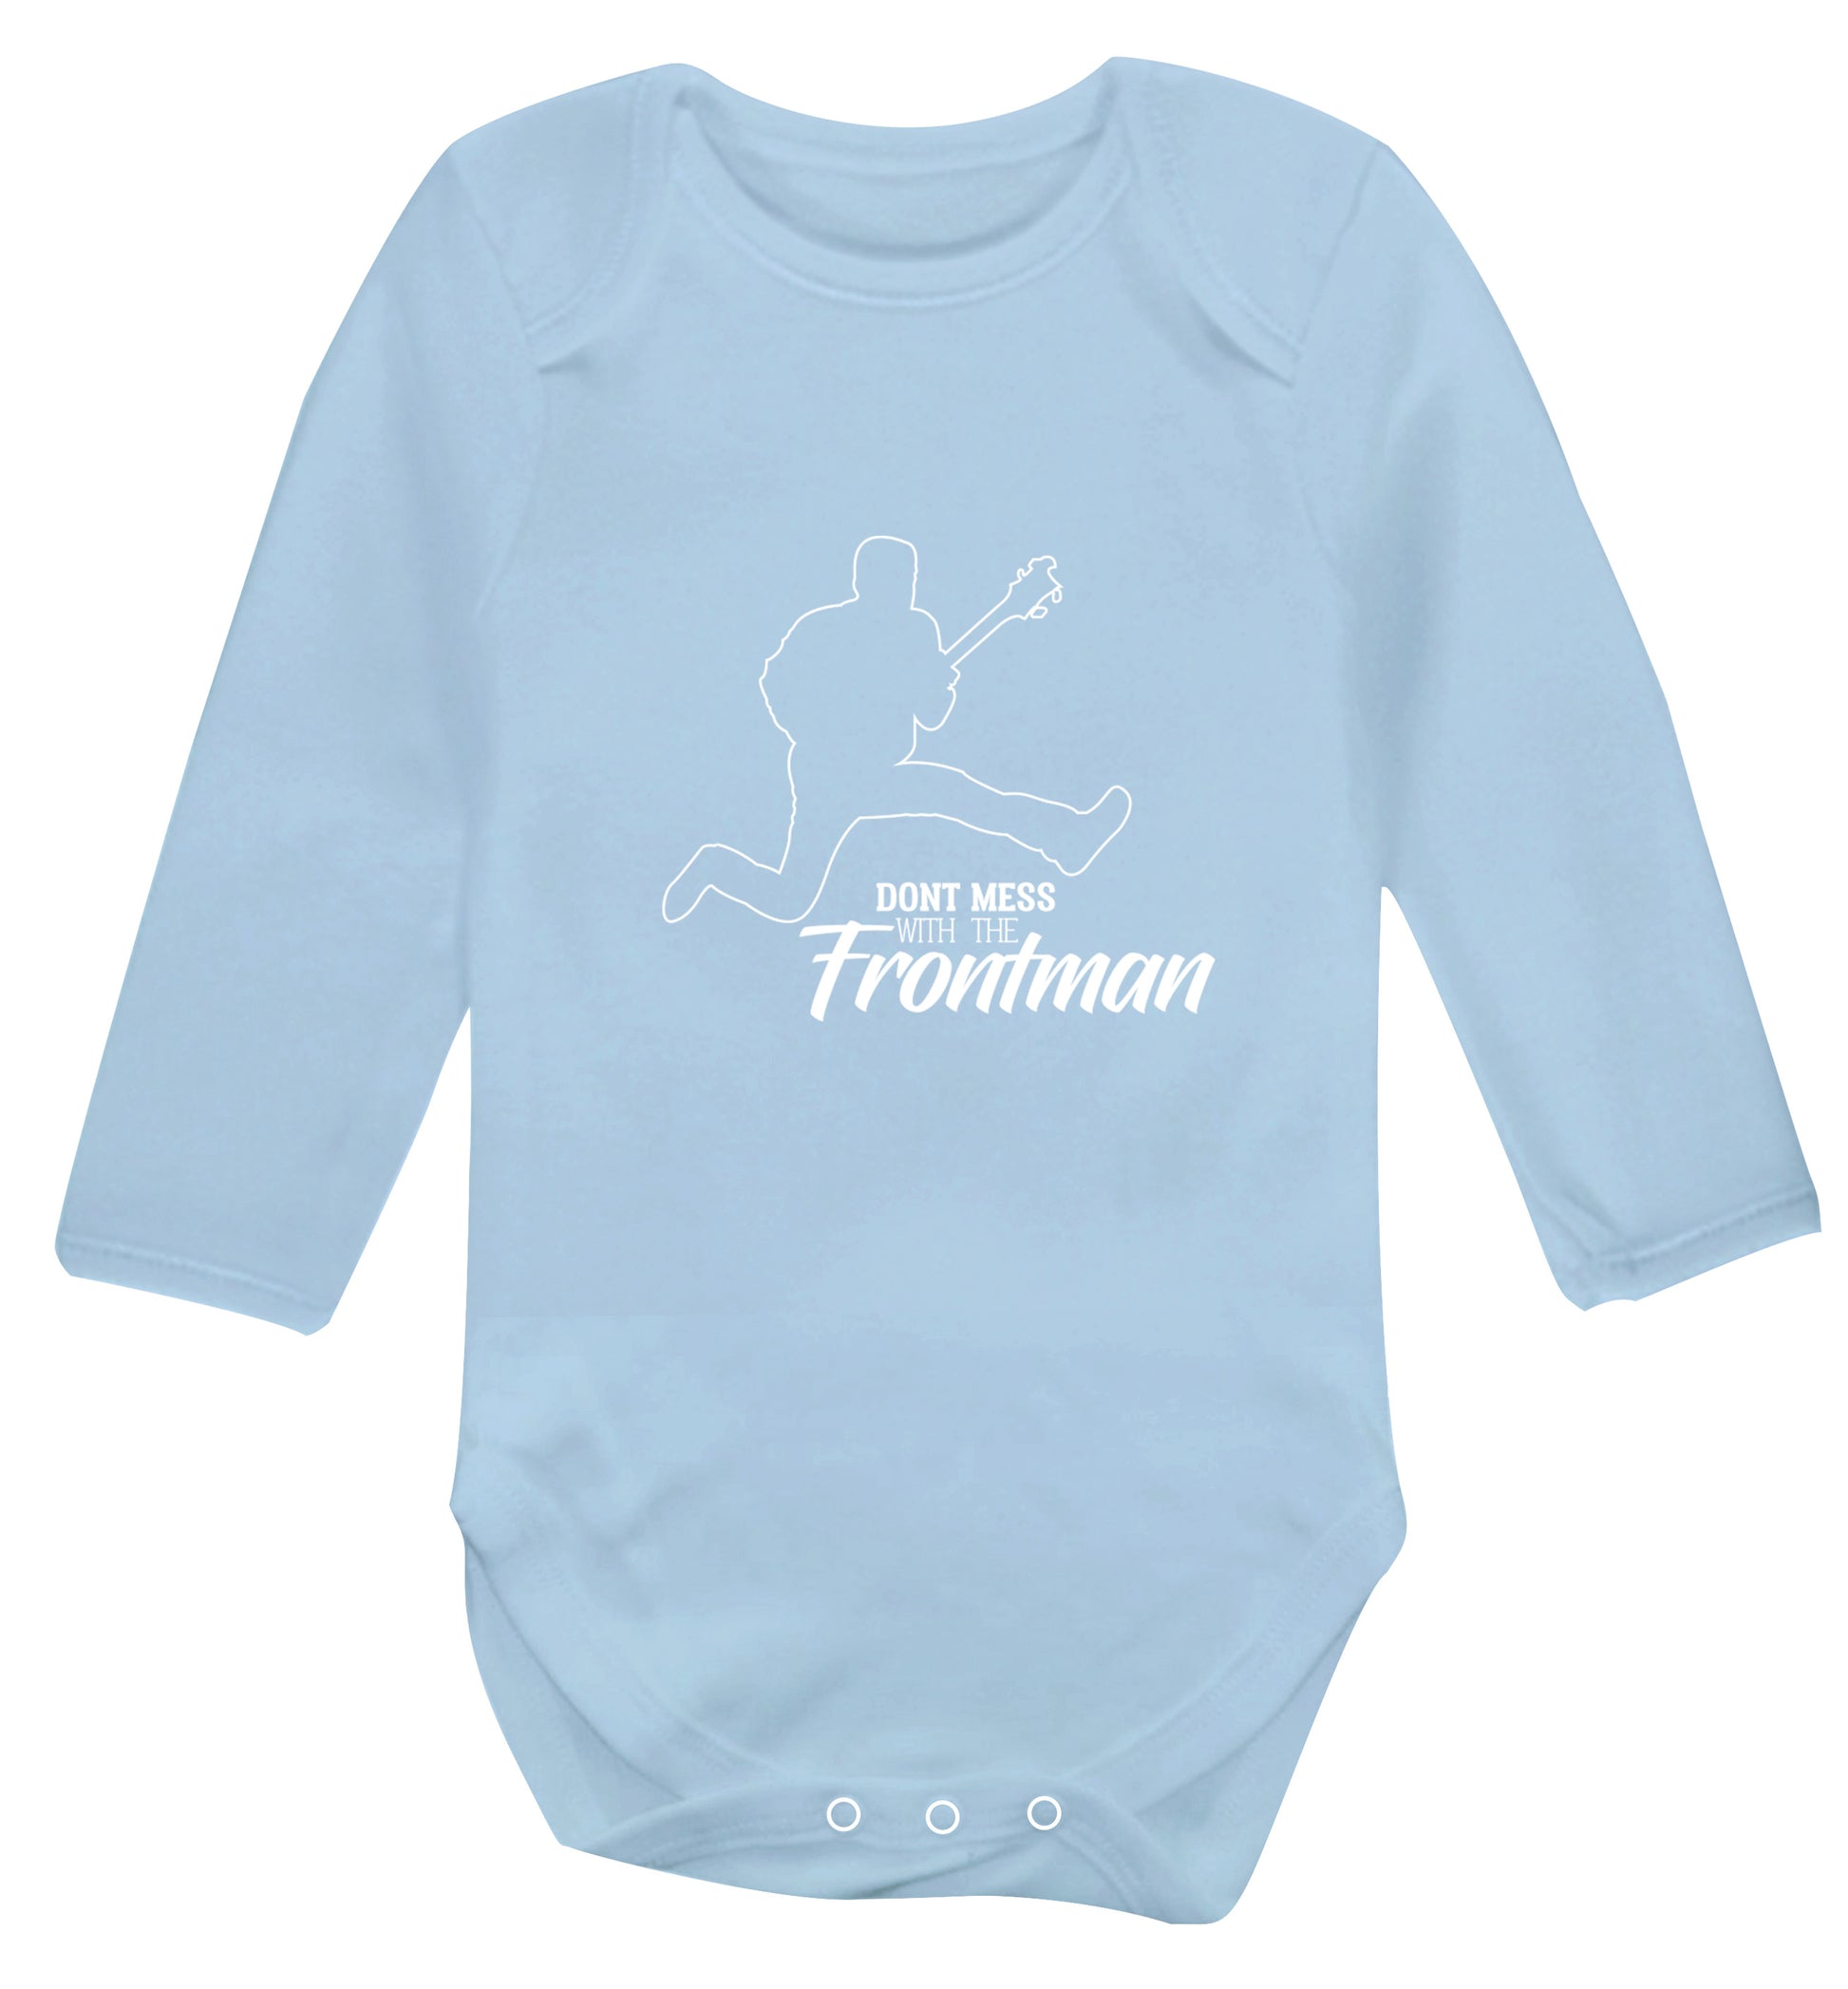 Don't mess with the frontman Baby Vest long sleeved pale blue 6-12 months